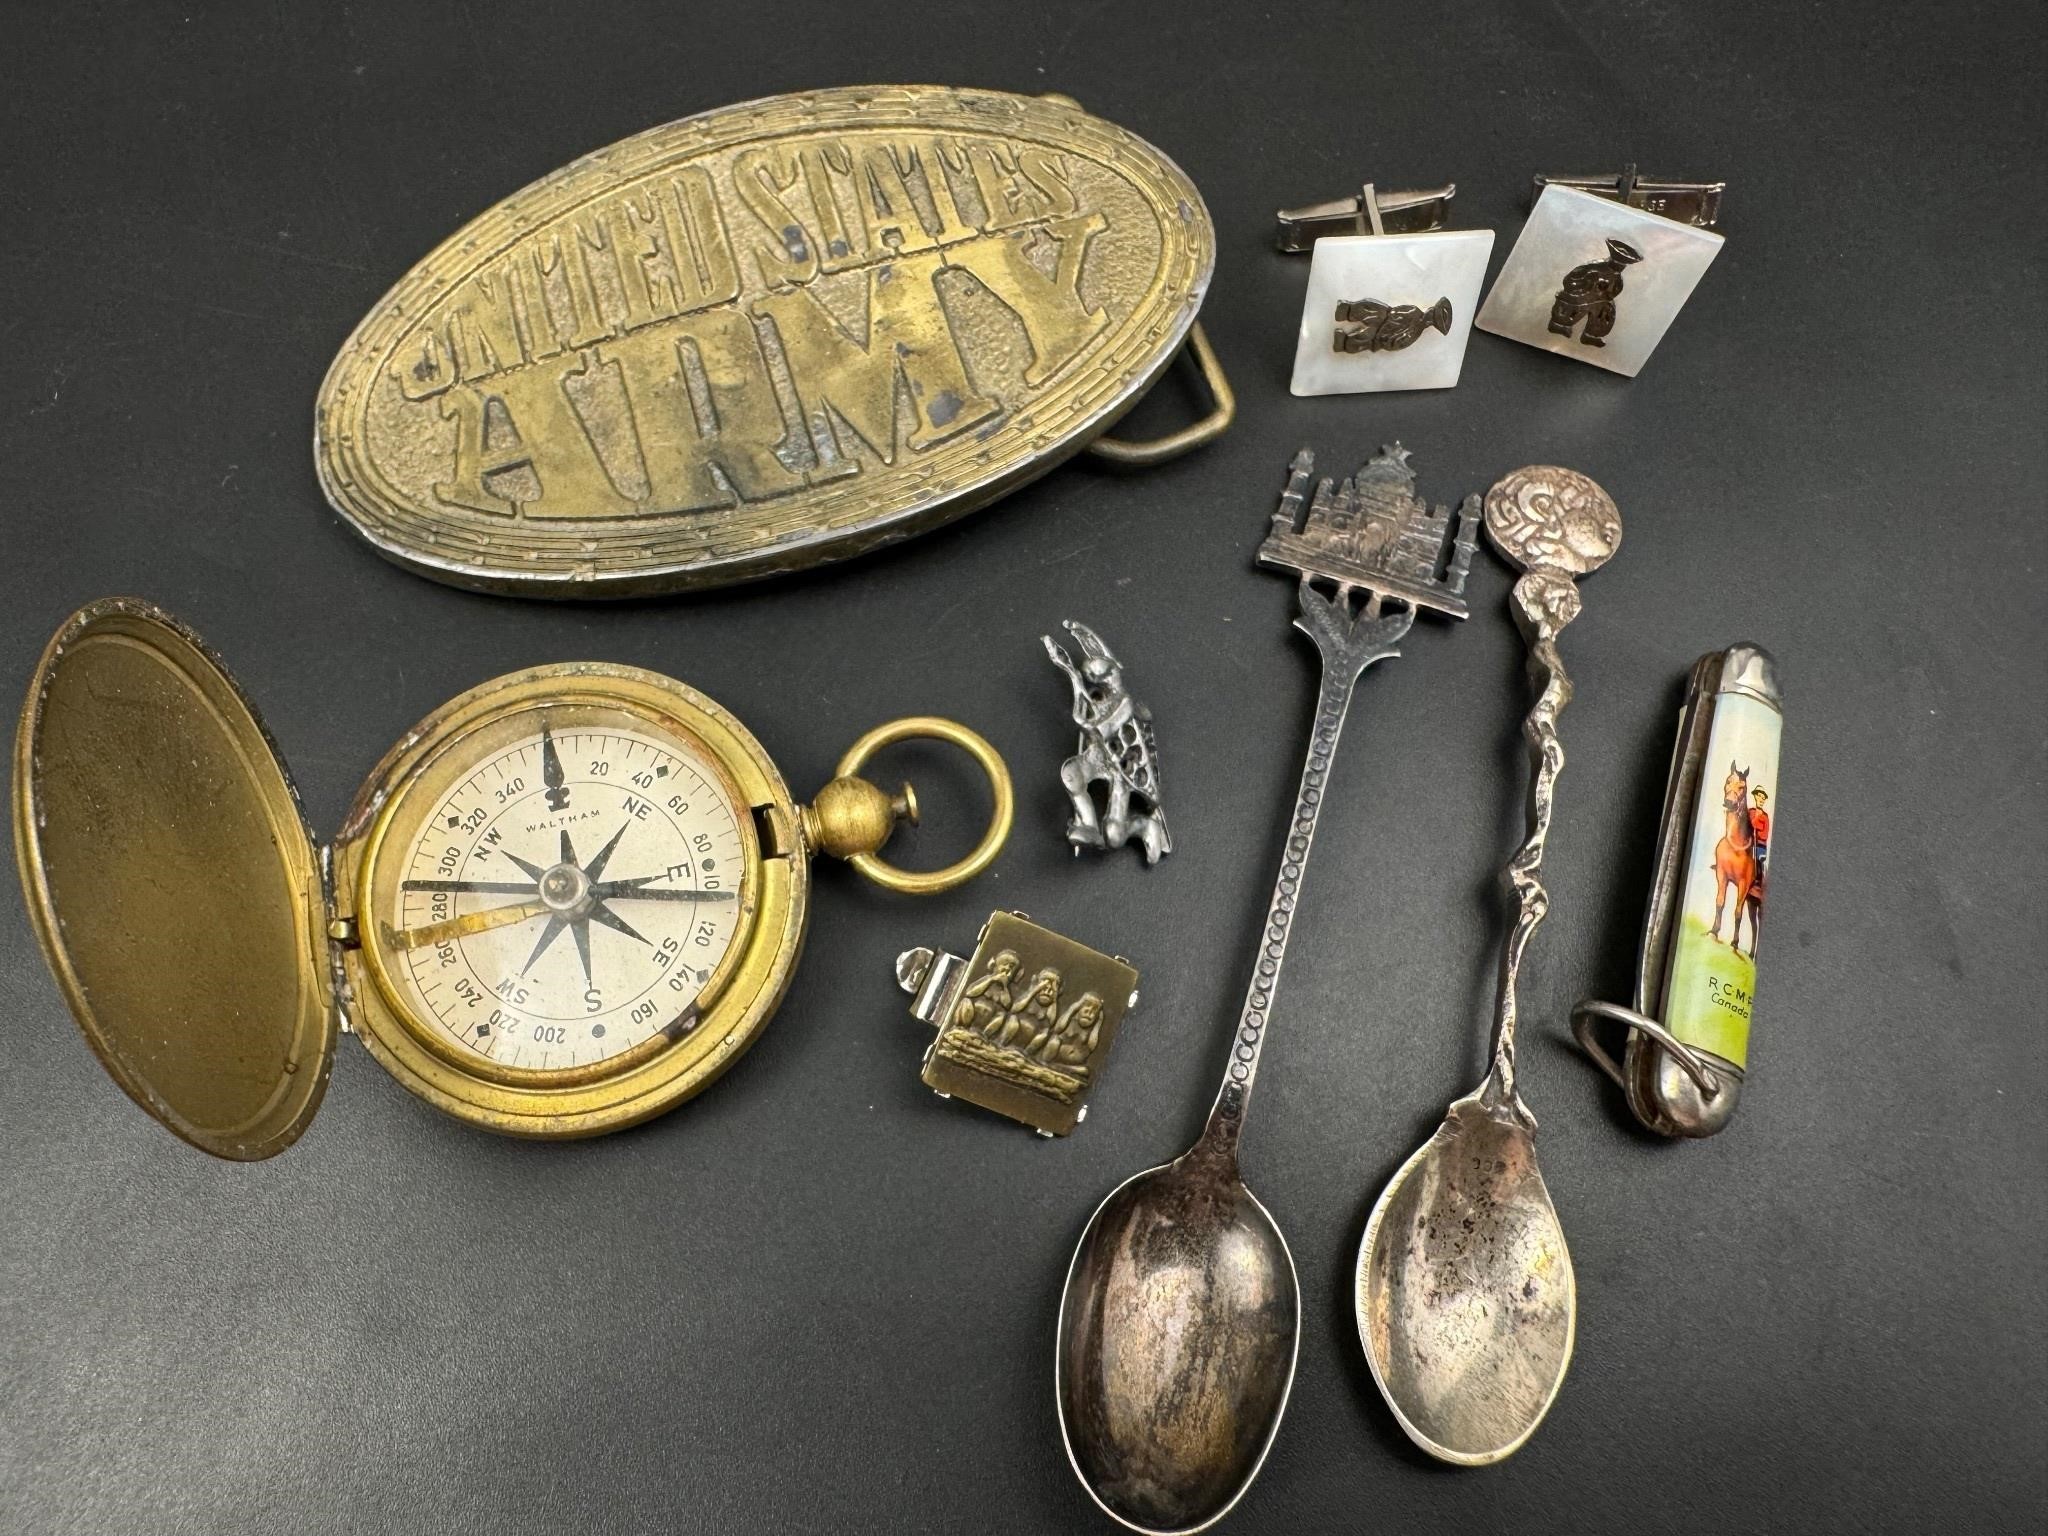 US military compass, 800 spoon, belt buckle more